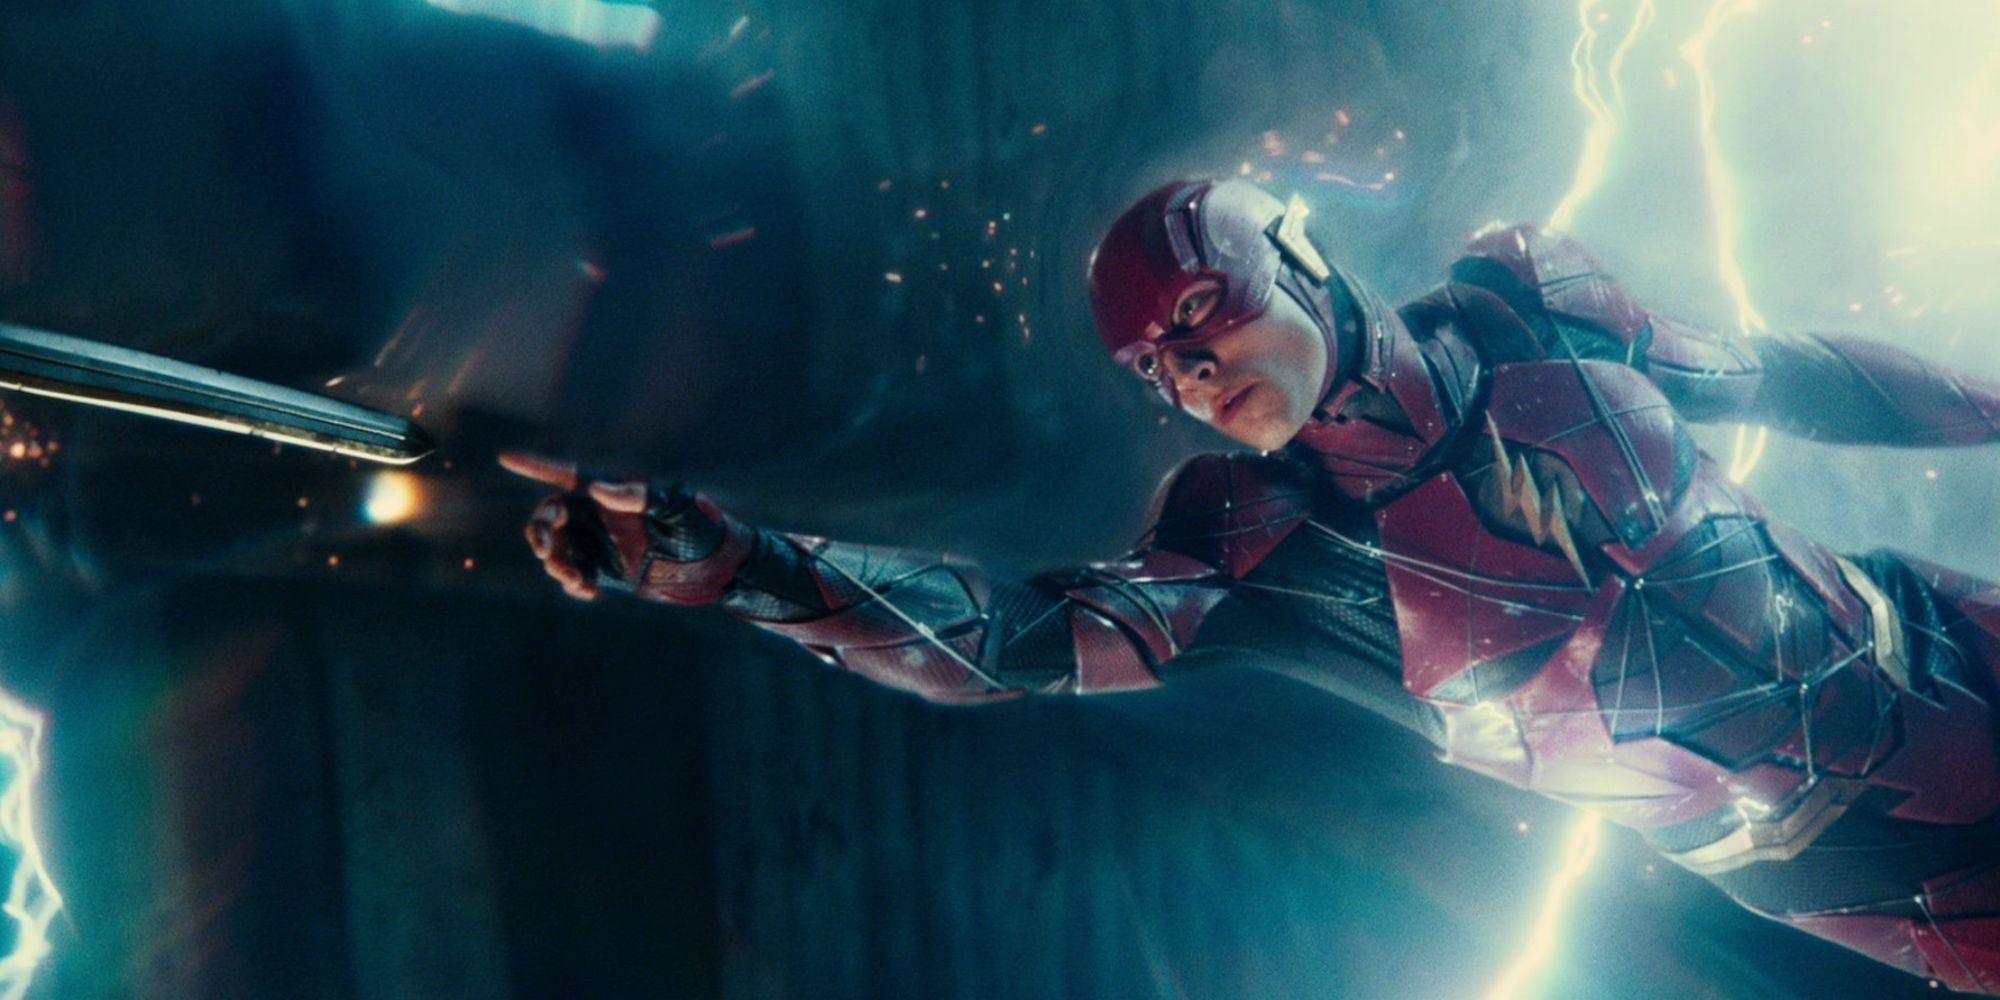 The Flash pushes Diana's sword with his finger in Justice League